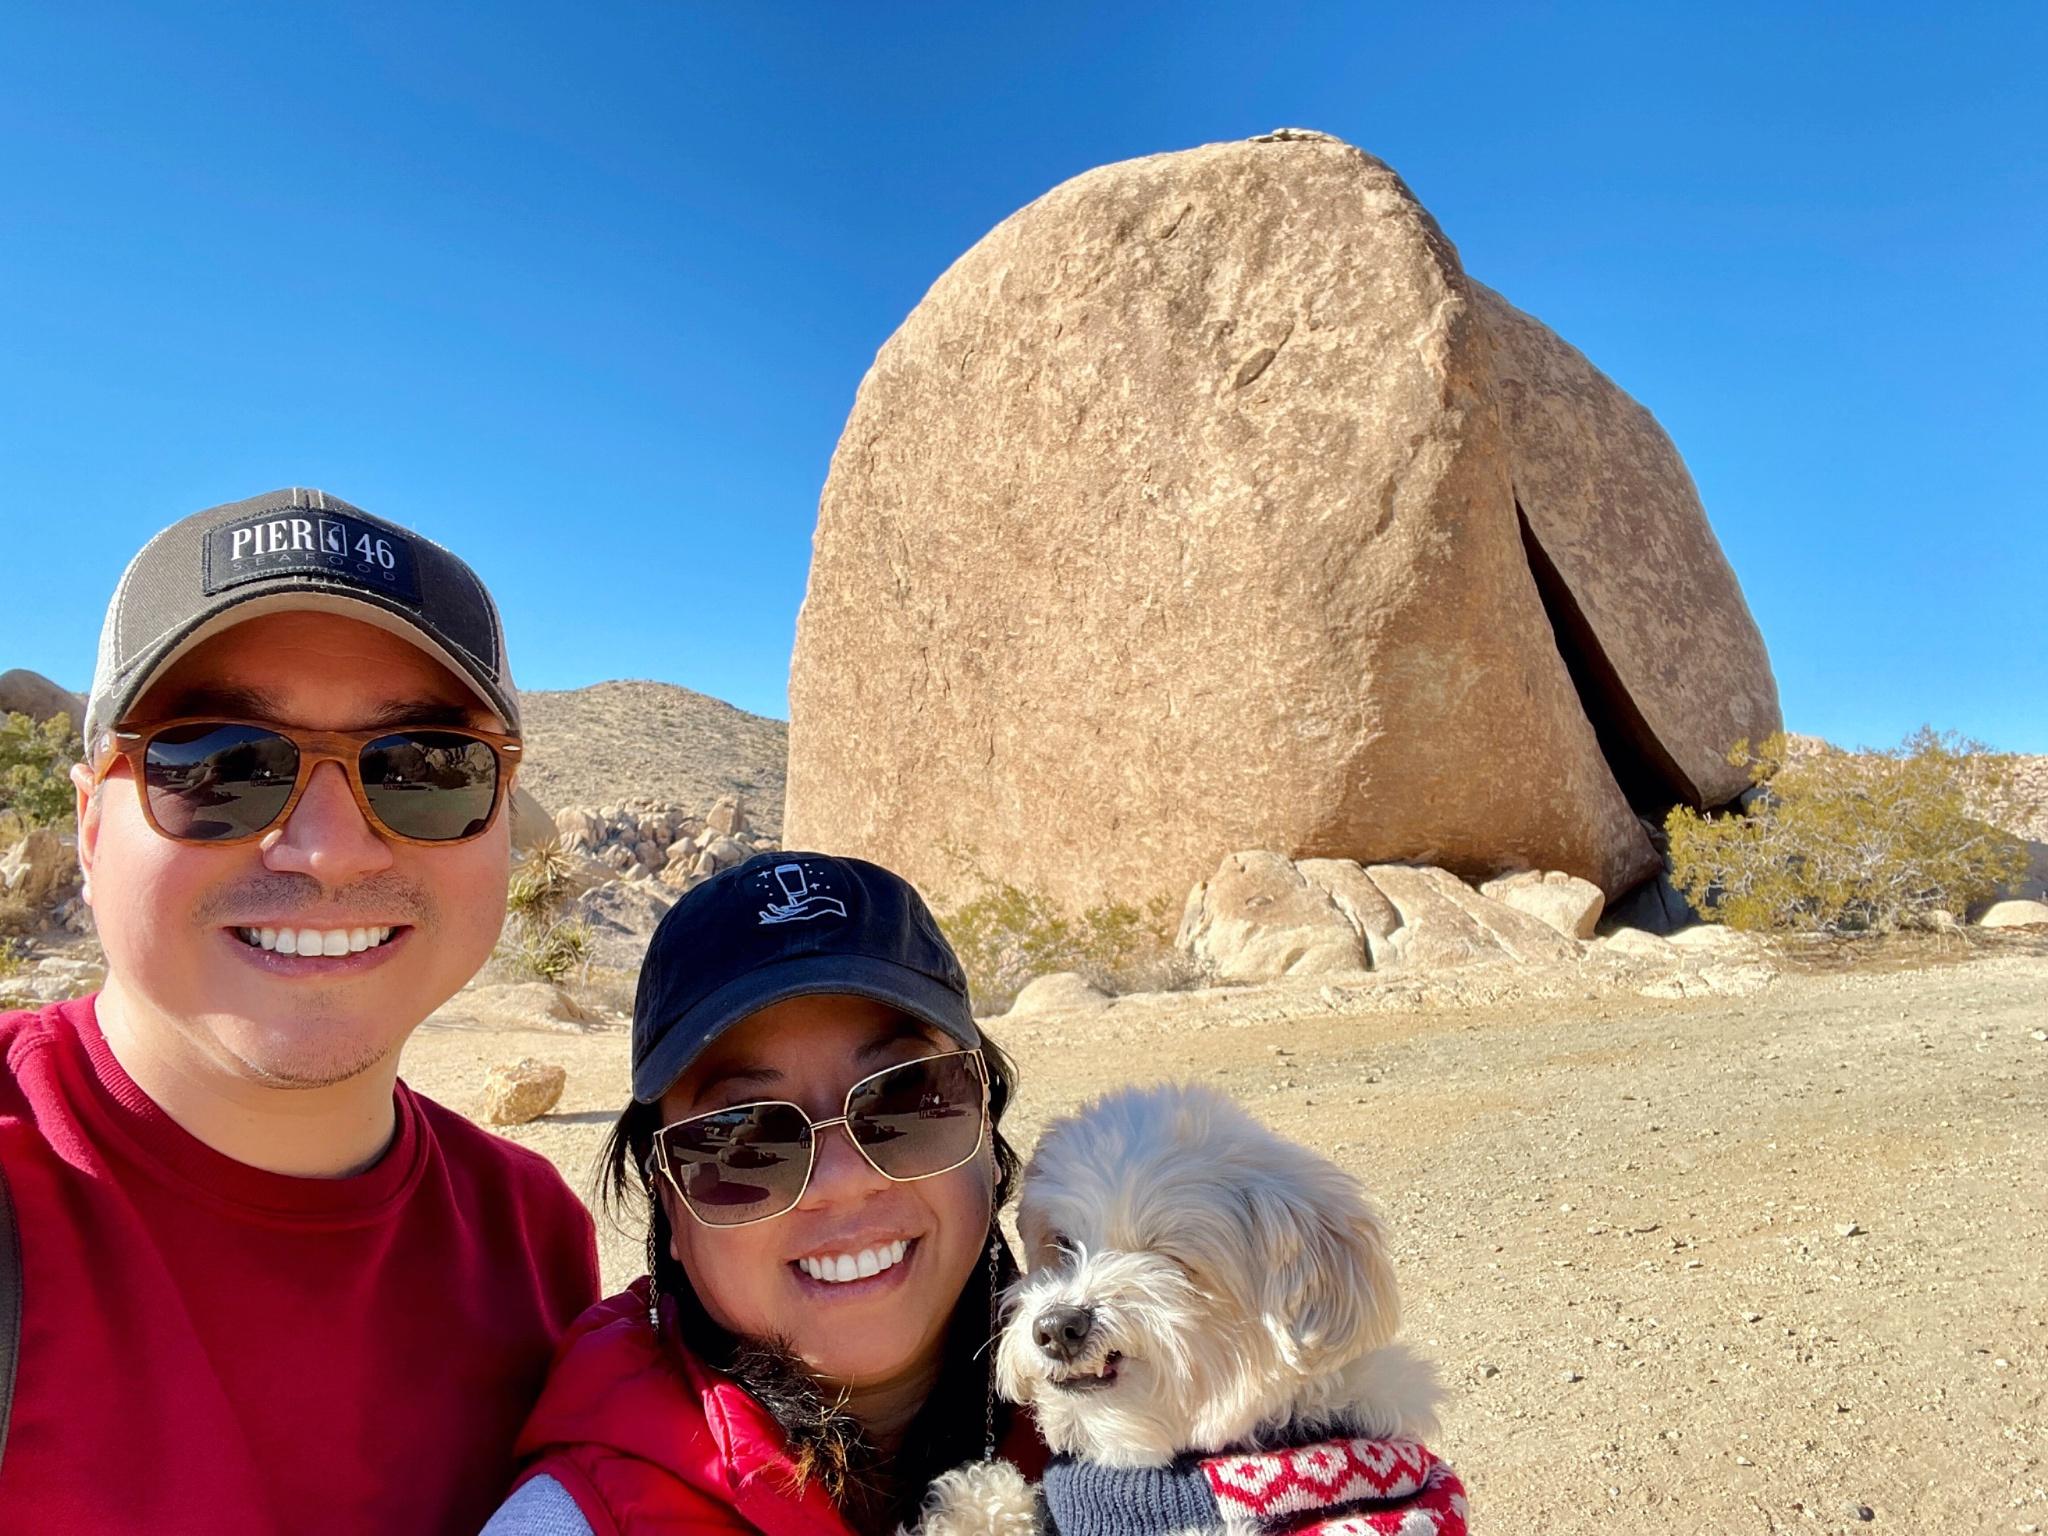 From our pack to yours…Merry Christmas from Joshua Tree! Bonus memes incorporated